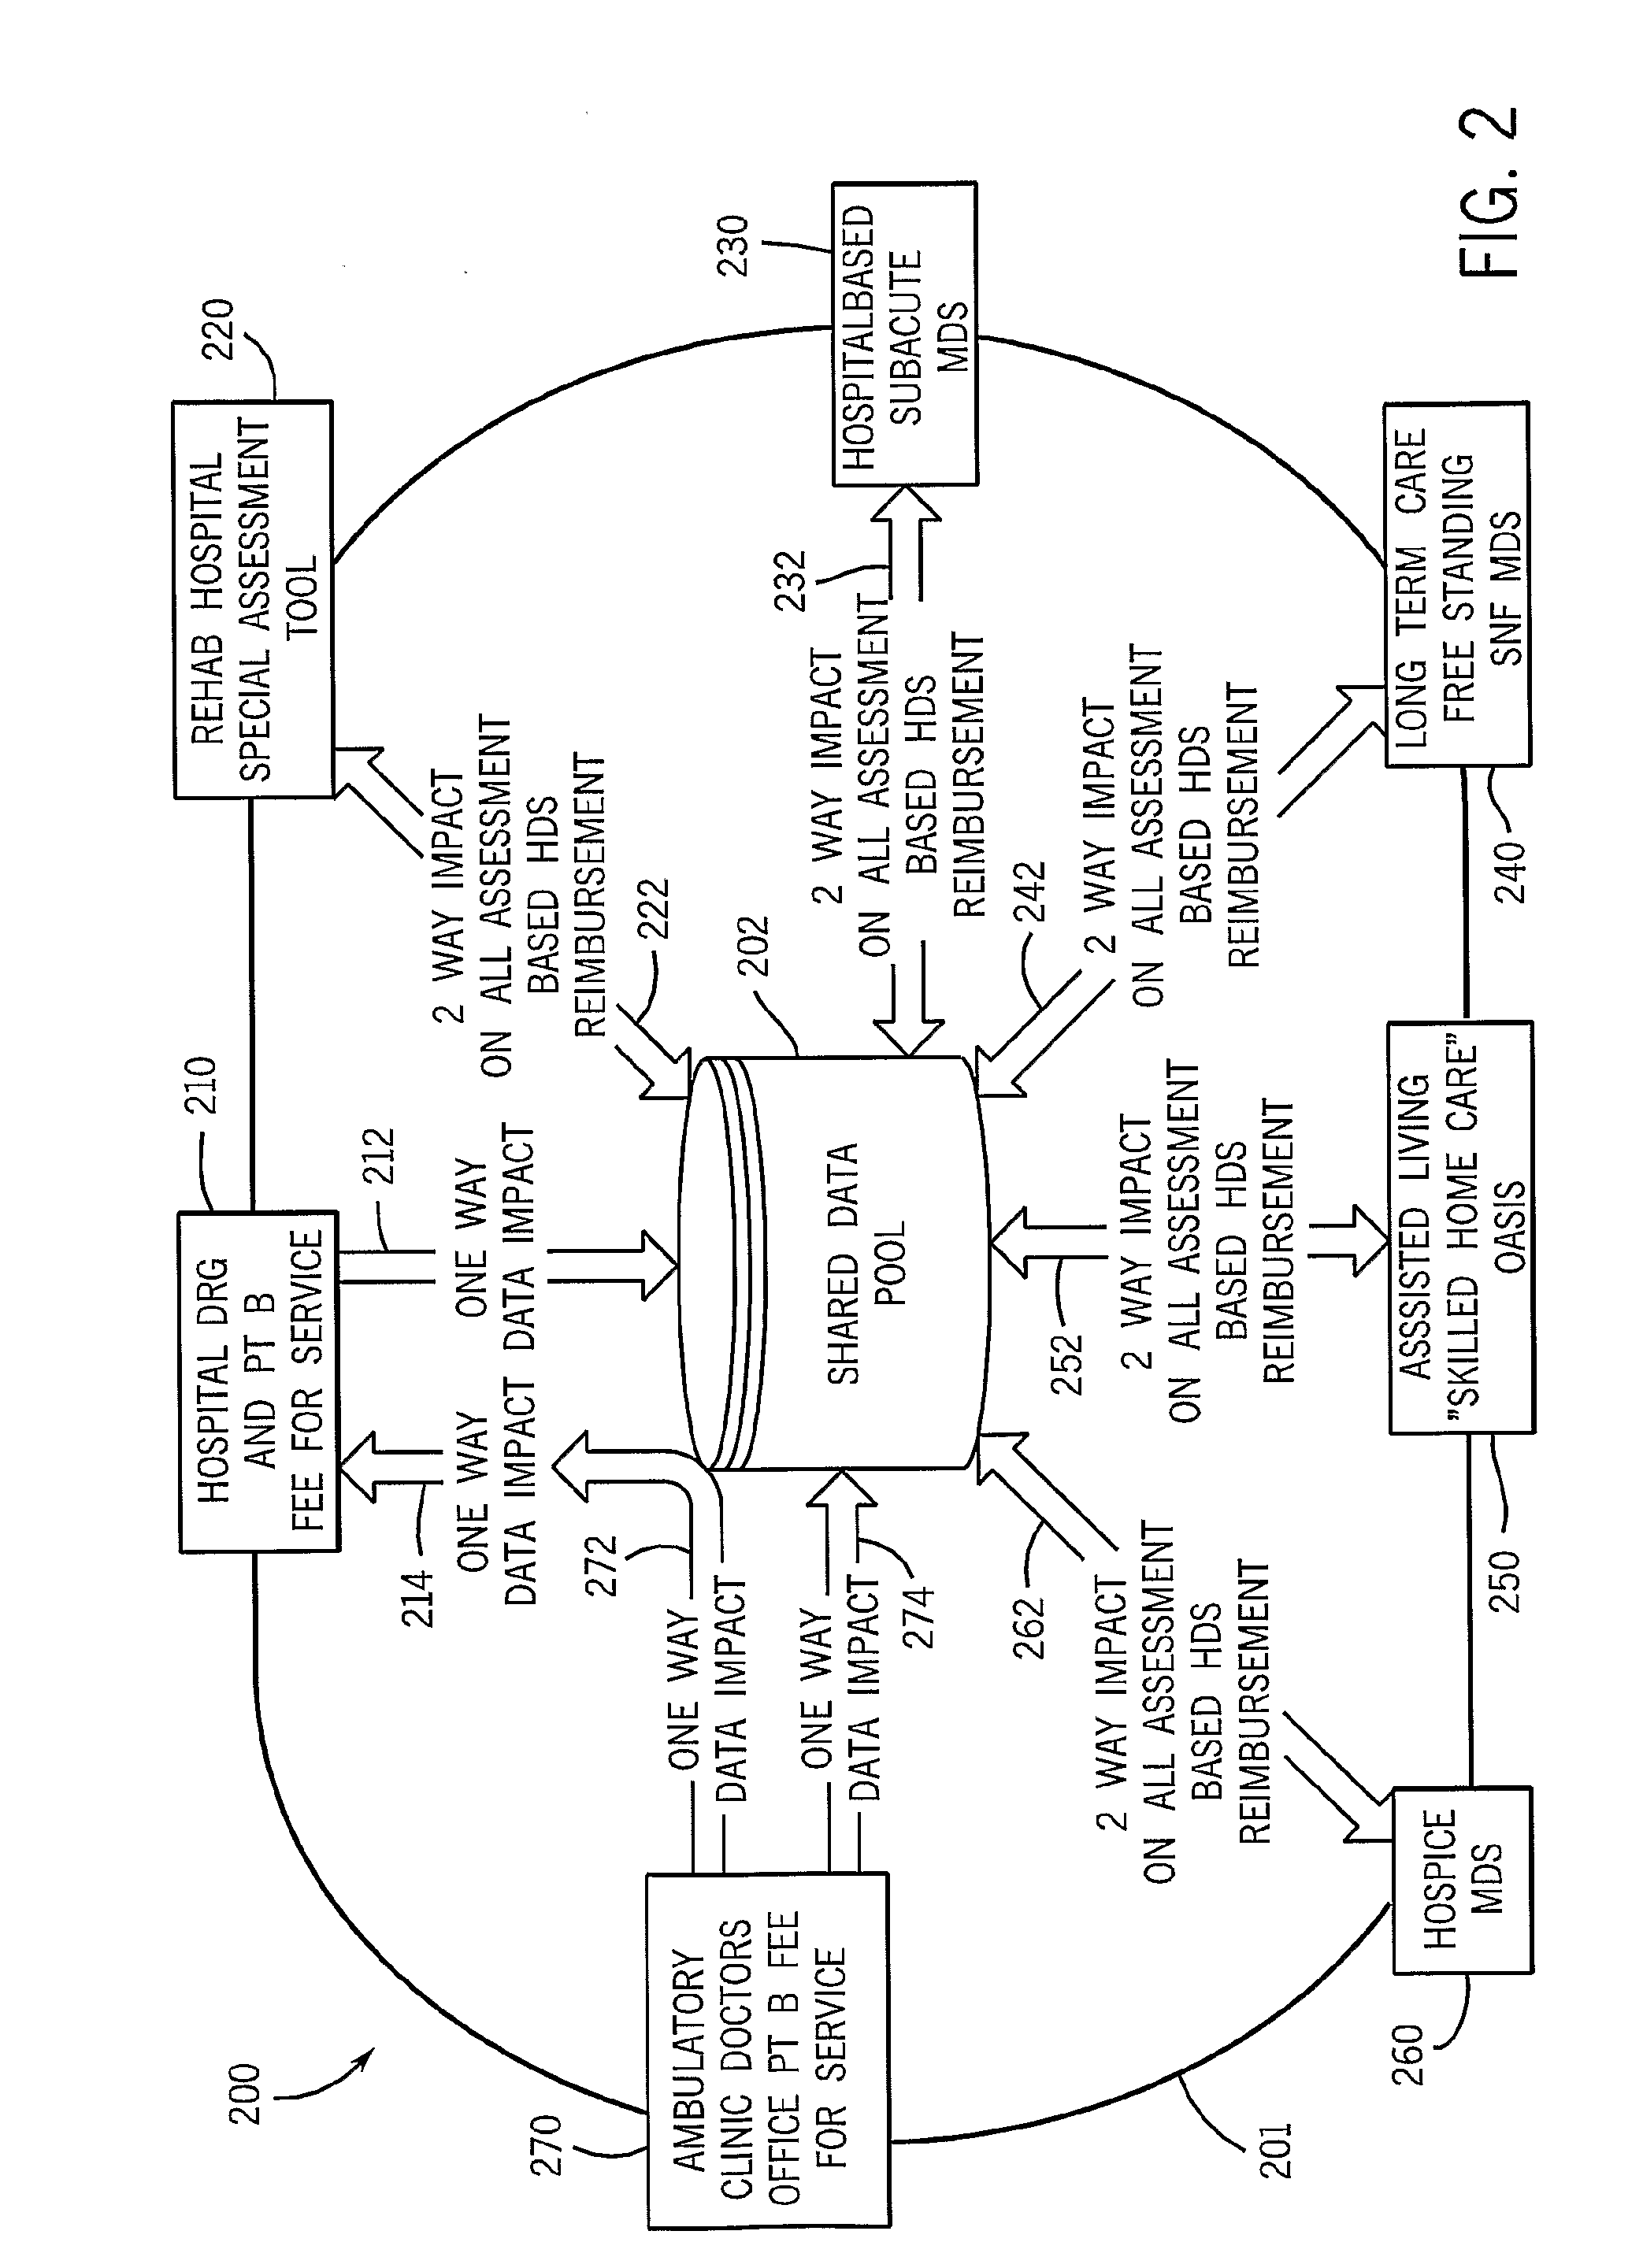 Data collection and data management system and method for use in health delivery settings